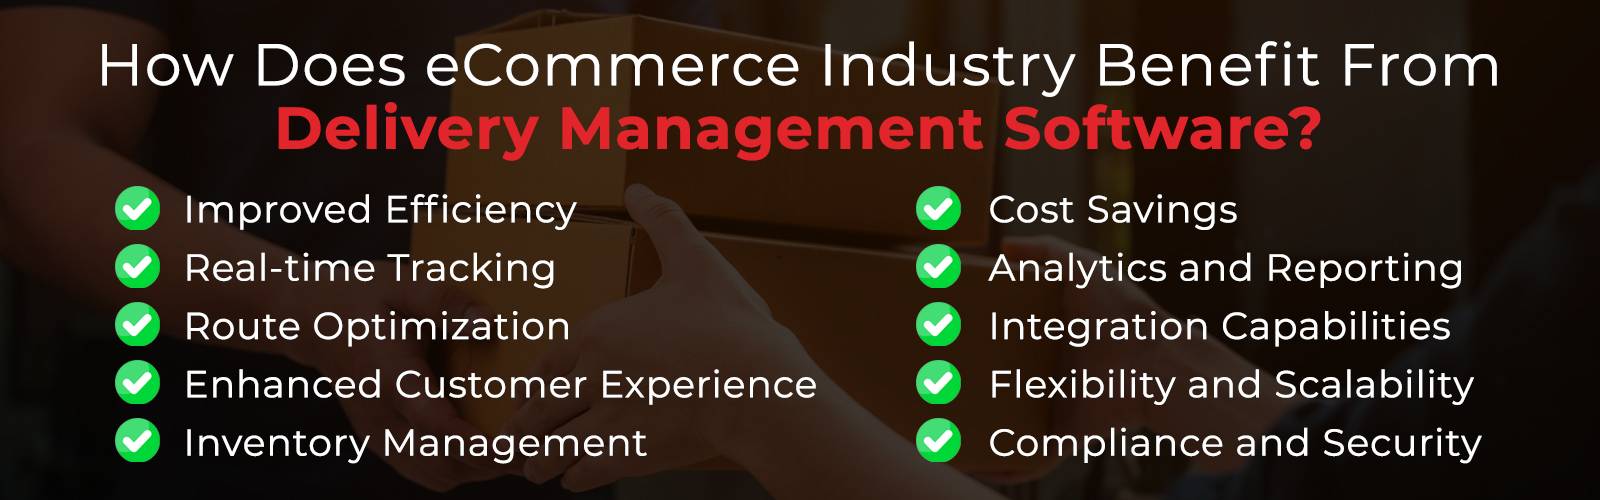 Delivery Management Software for eCommerce Industry benefits